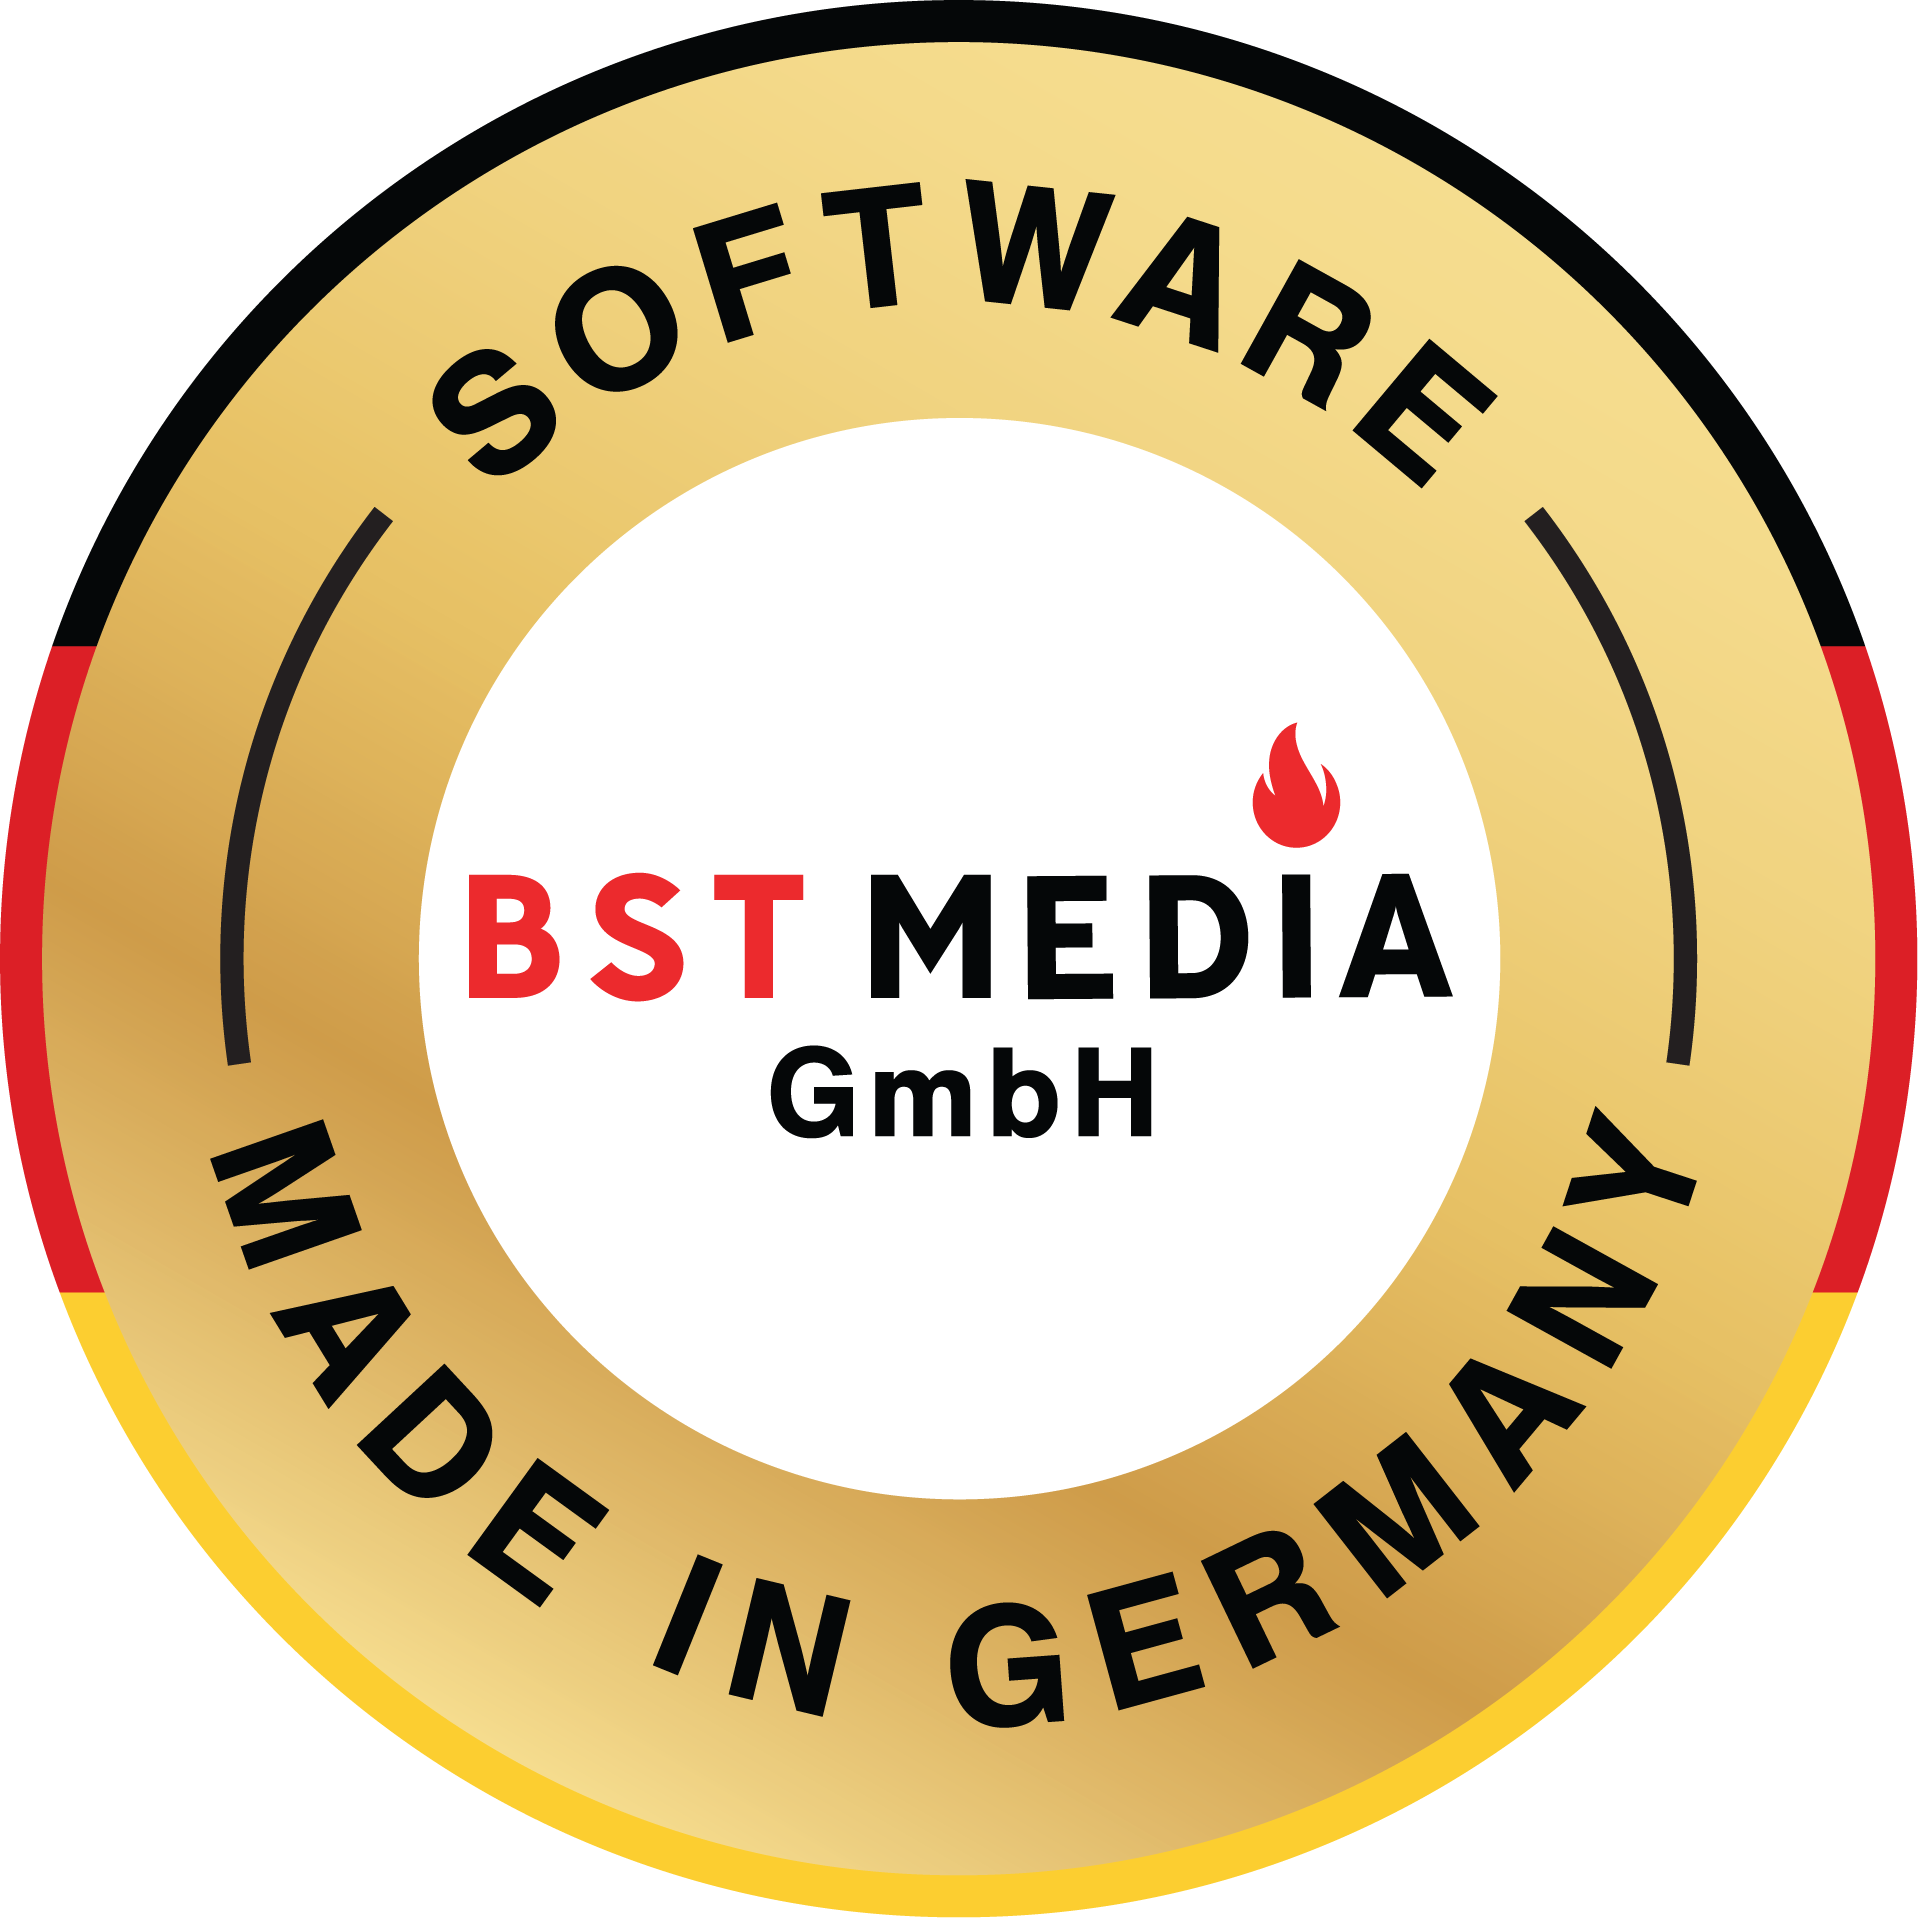 BST Media Gmbh - Software made in Germany